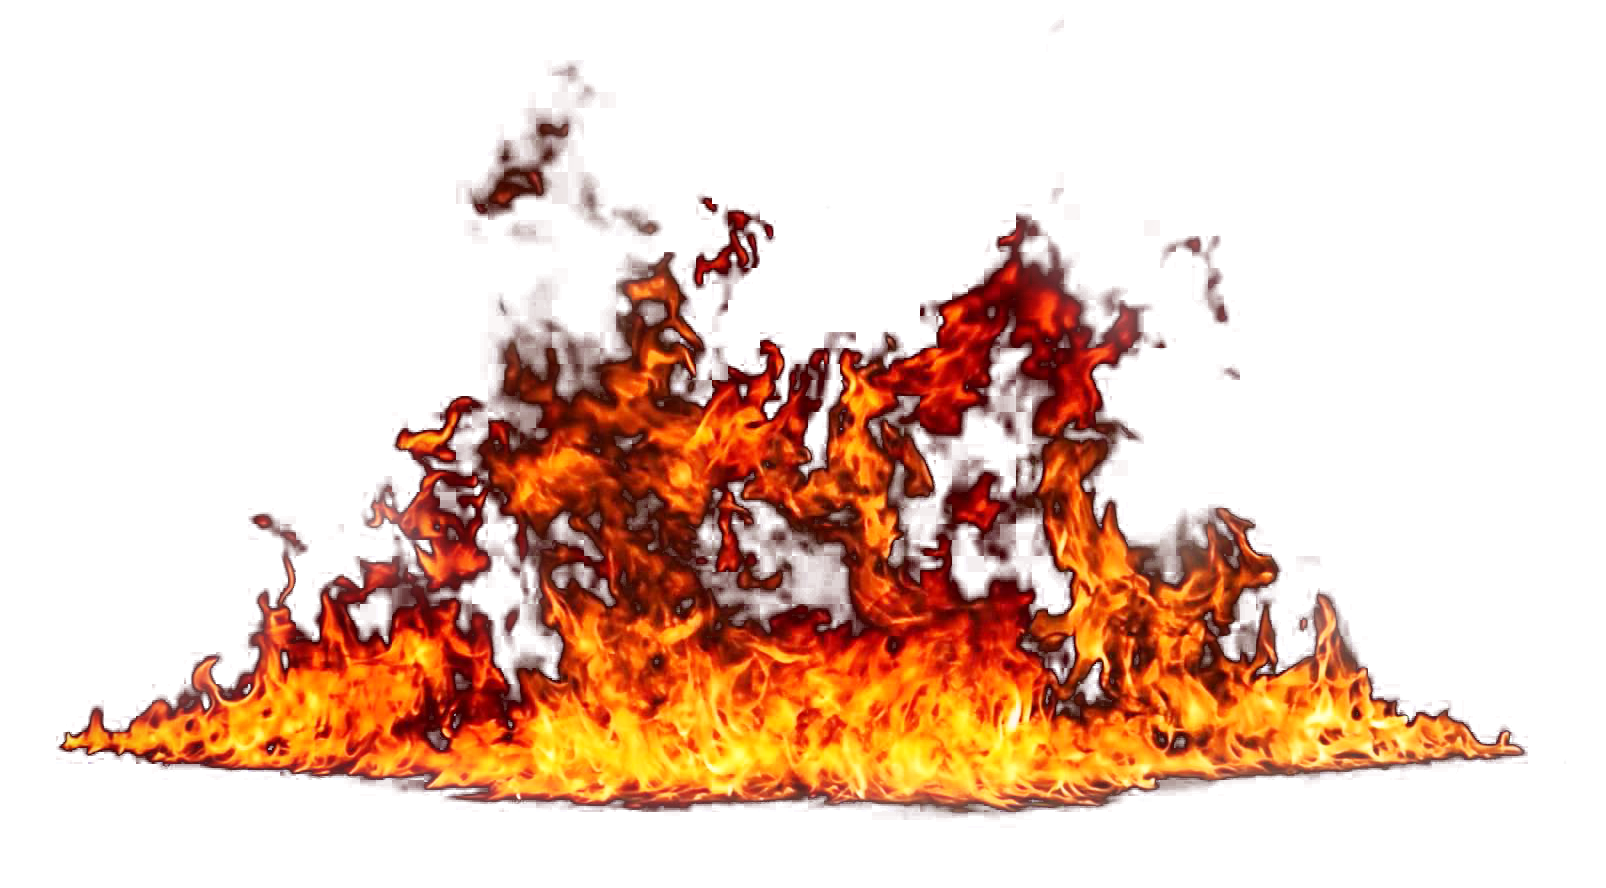 Big Fire Flame PNG Image #44303 - Free Icons and PNG Backgrounds